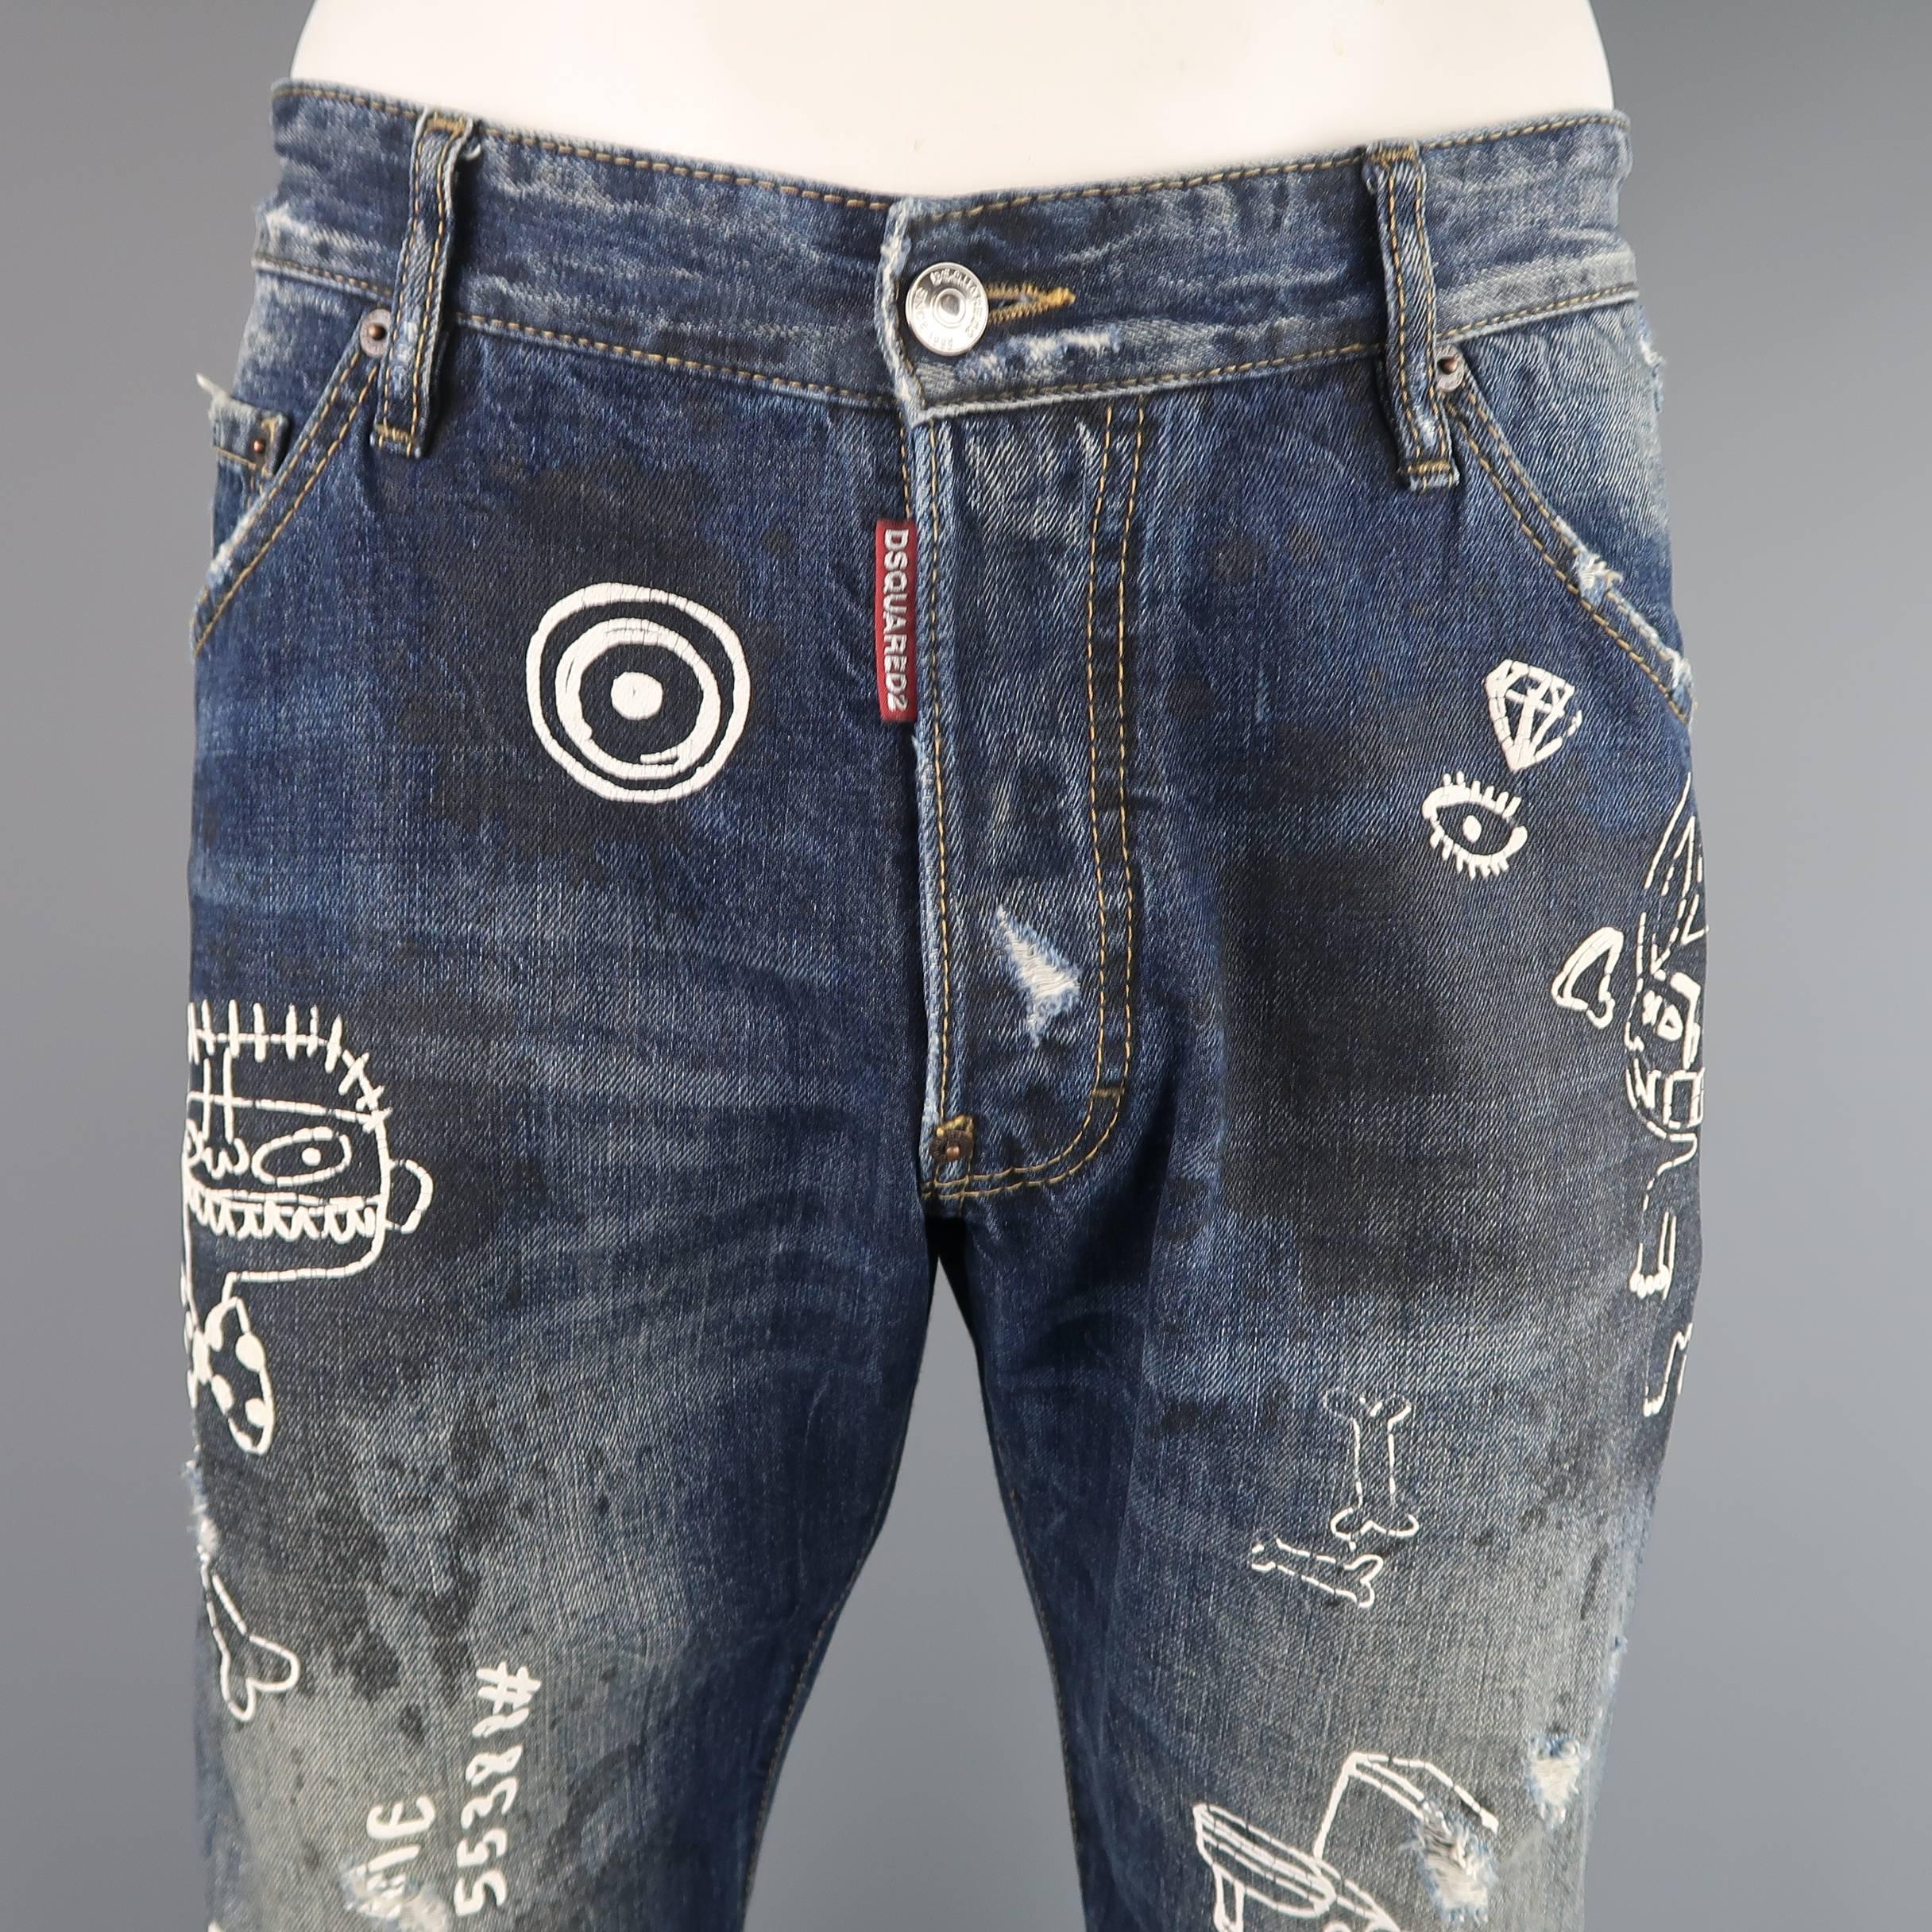 DSQUARED2 jeans come in dark dirty wash denim and feature a button fly, splatter distress details, and white 